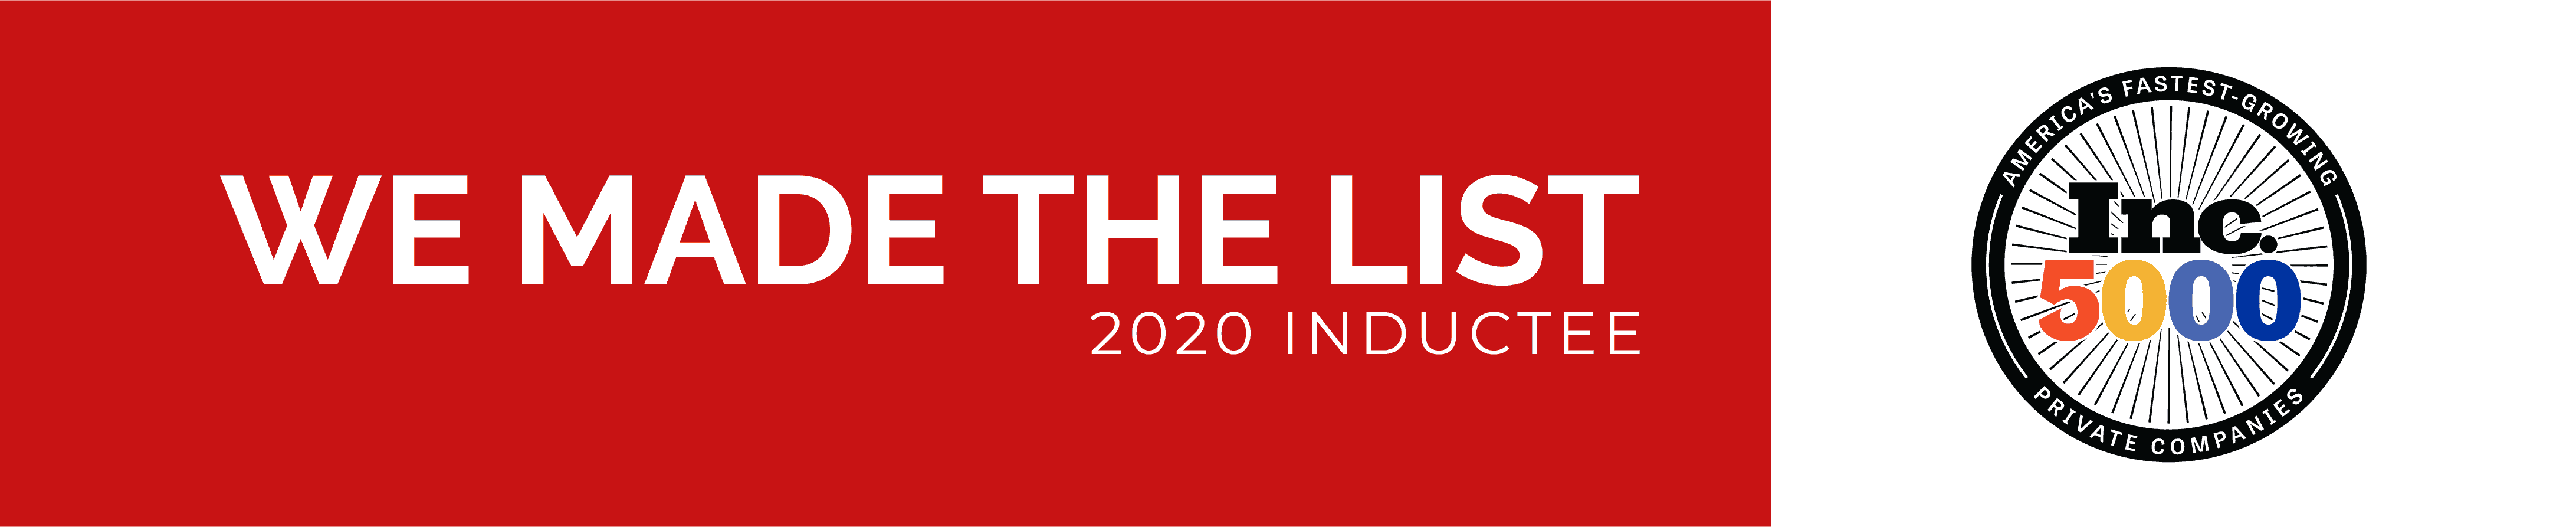 Text that reads, "We made the list, 2020 inductee" next to the Inc. 5000 logo